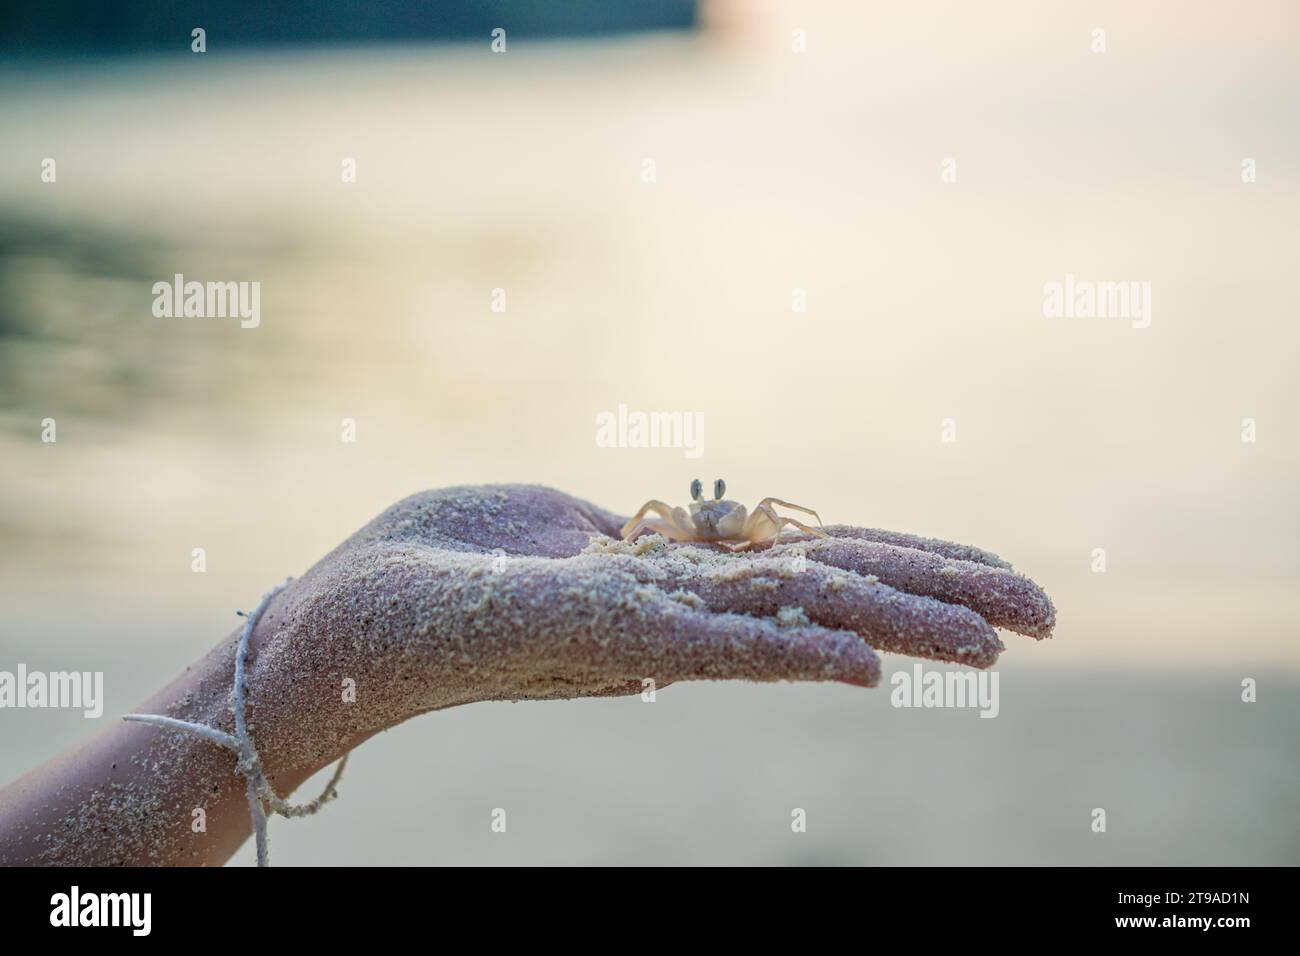 Close up small crab walking in a person's hands at the ocean Stock Photo